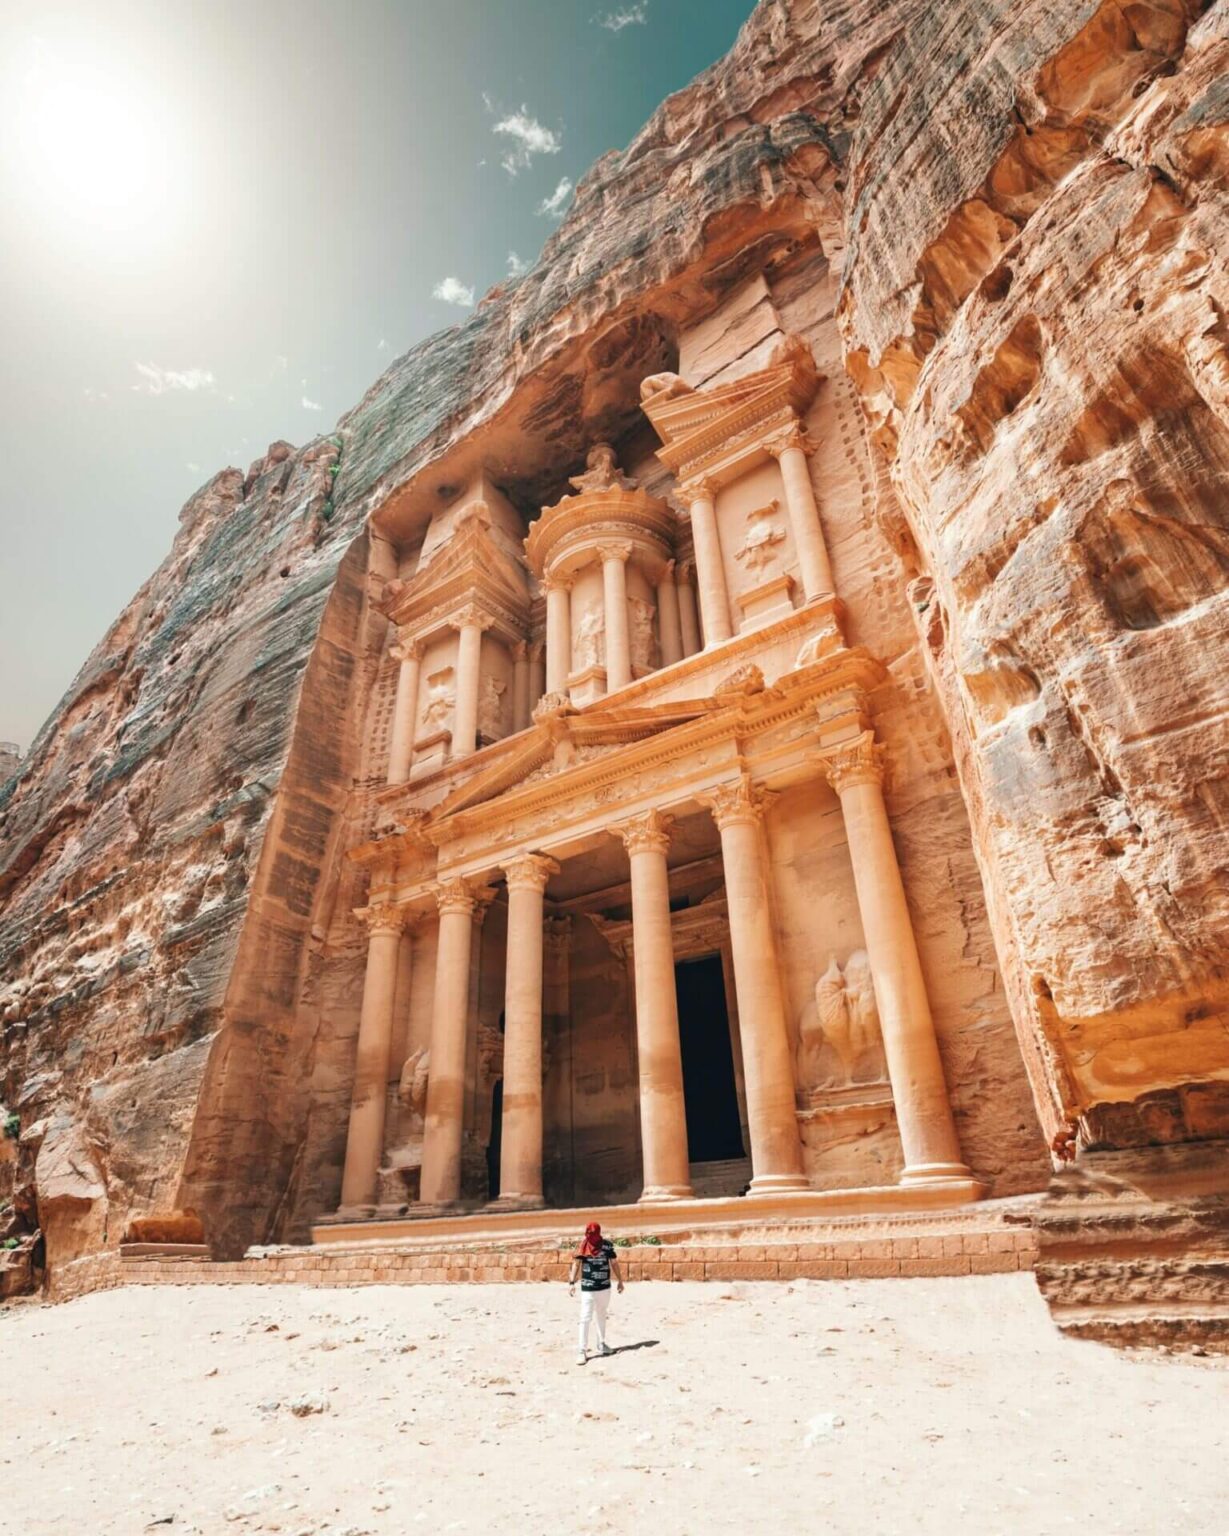 The stunning Archeological site of Petra